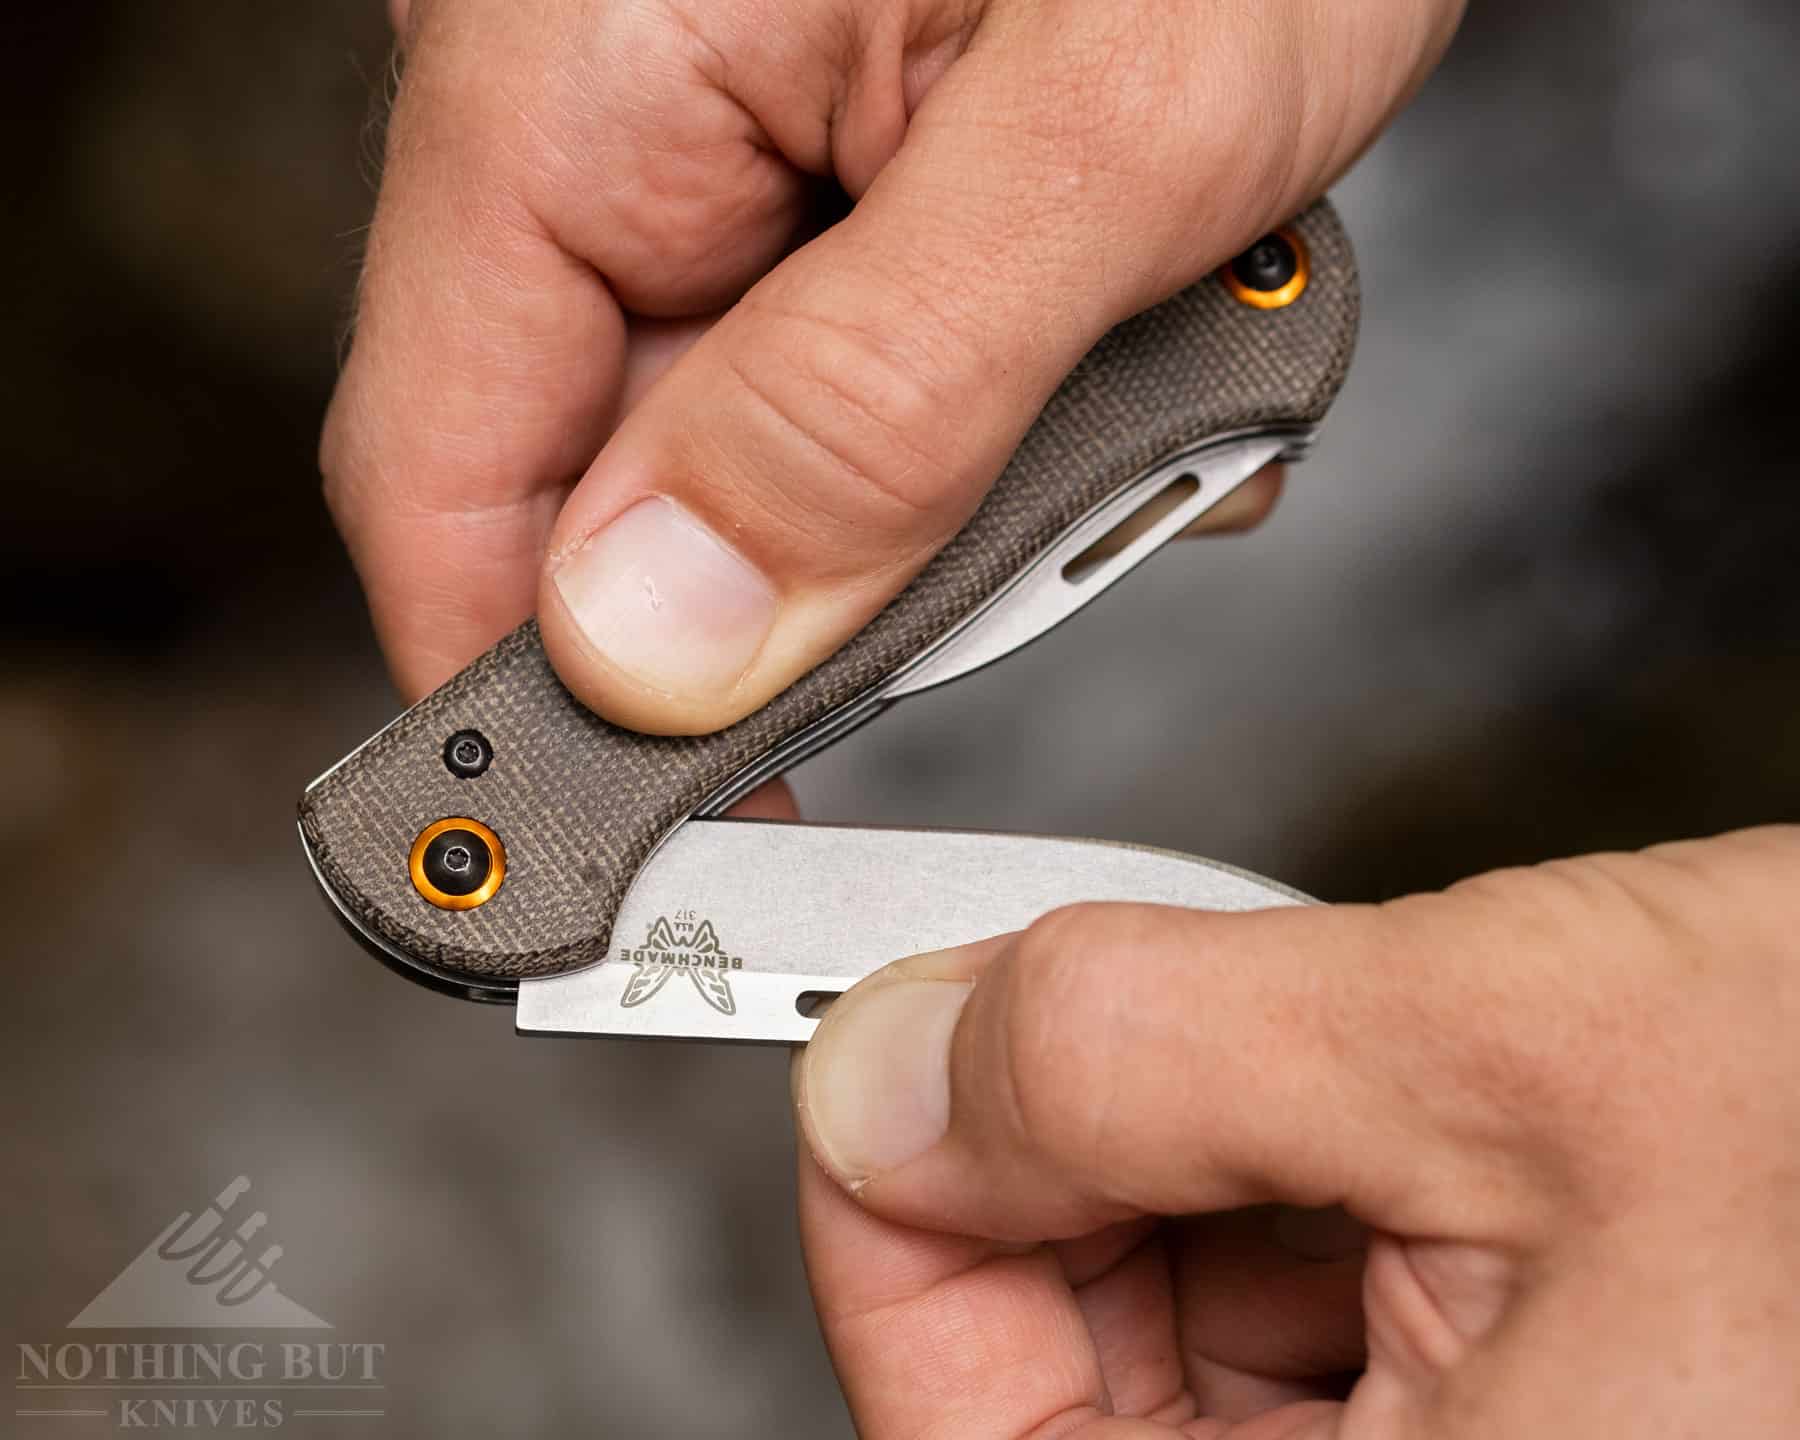 The slip joint spring on the Weekender is a little strong, but that is probably appropriate for such a rugged knife.